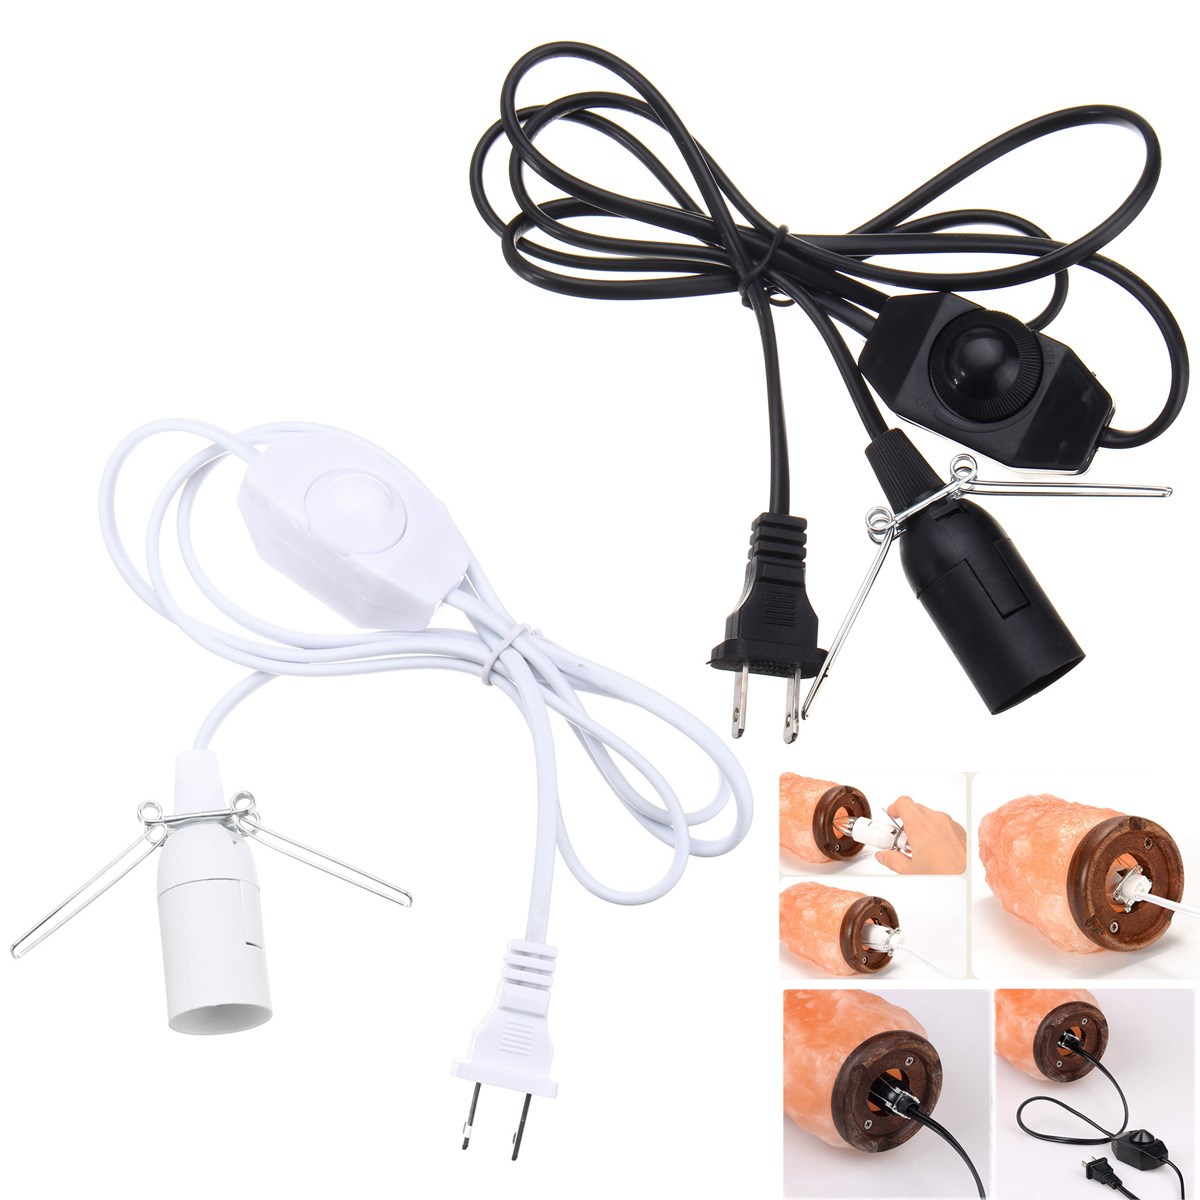 

1.5M E12 Bulb Adapter US Plug with Dimmer Cable Cord Switch for Himalayan Salt Lamp